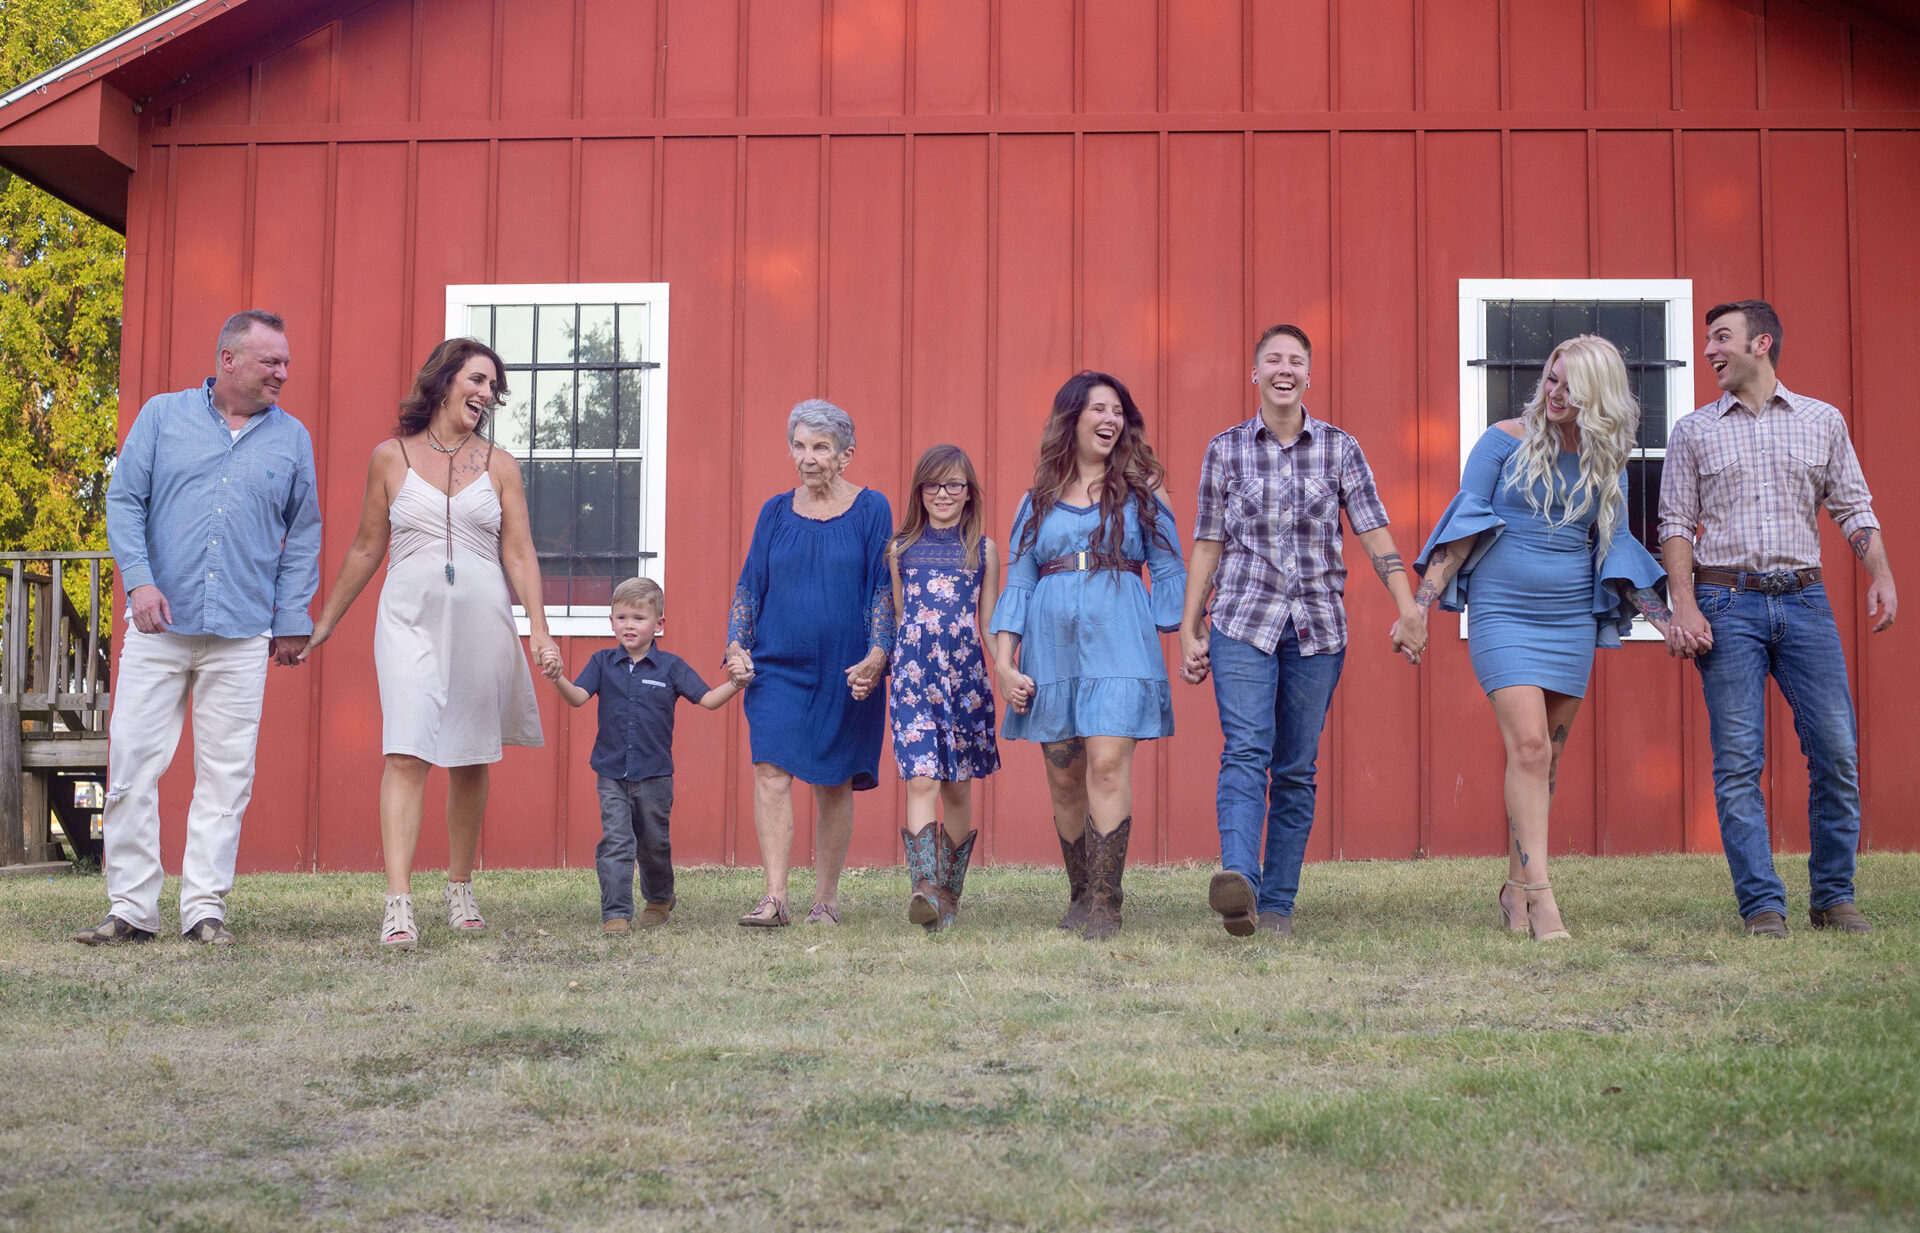 extended family photo session in front of a red barn in texas